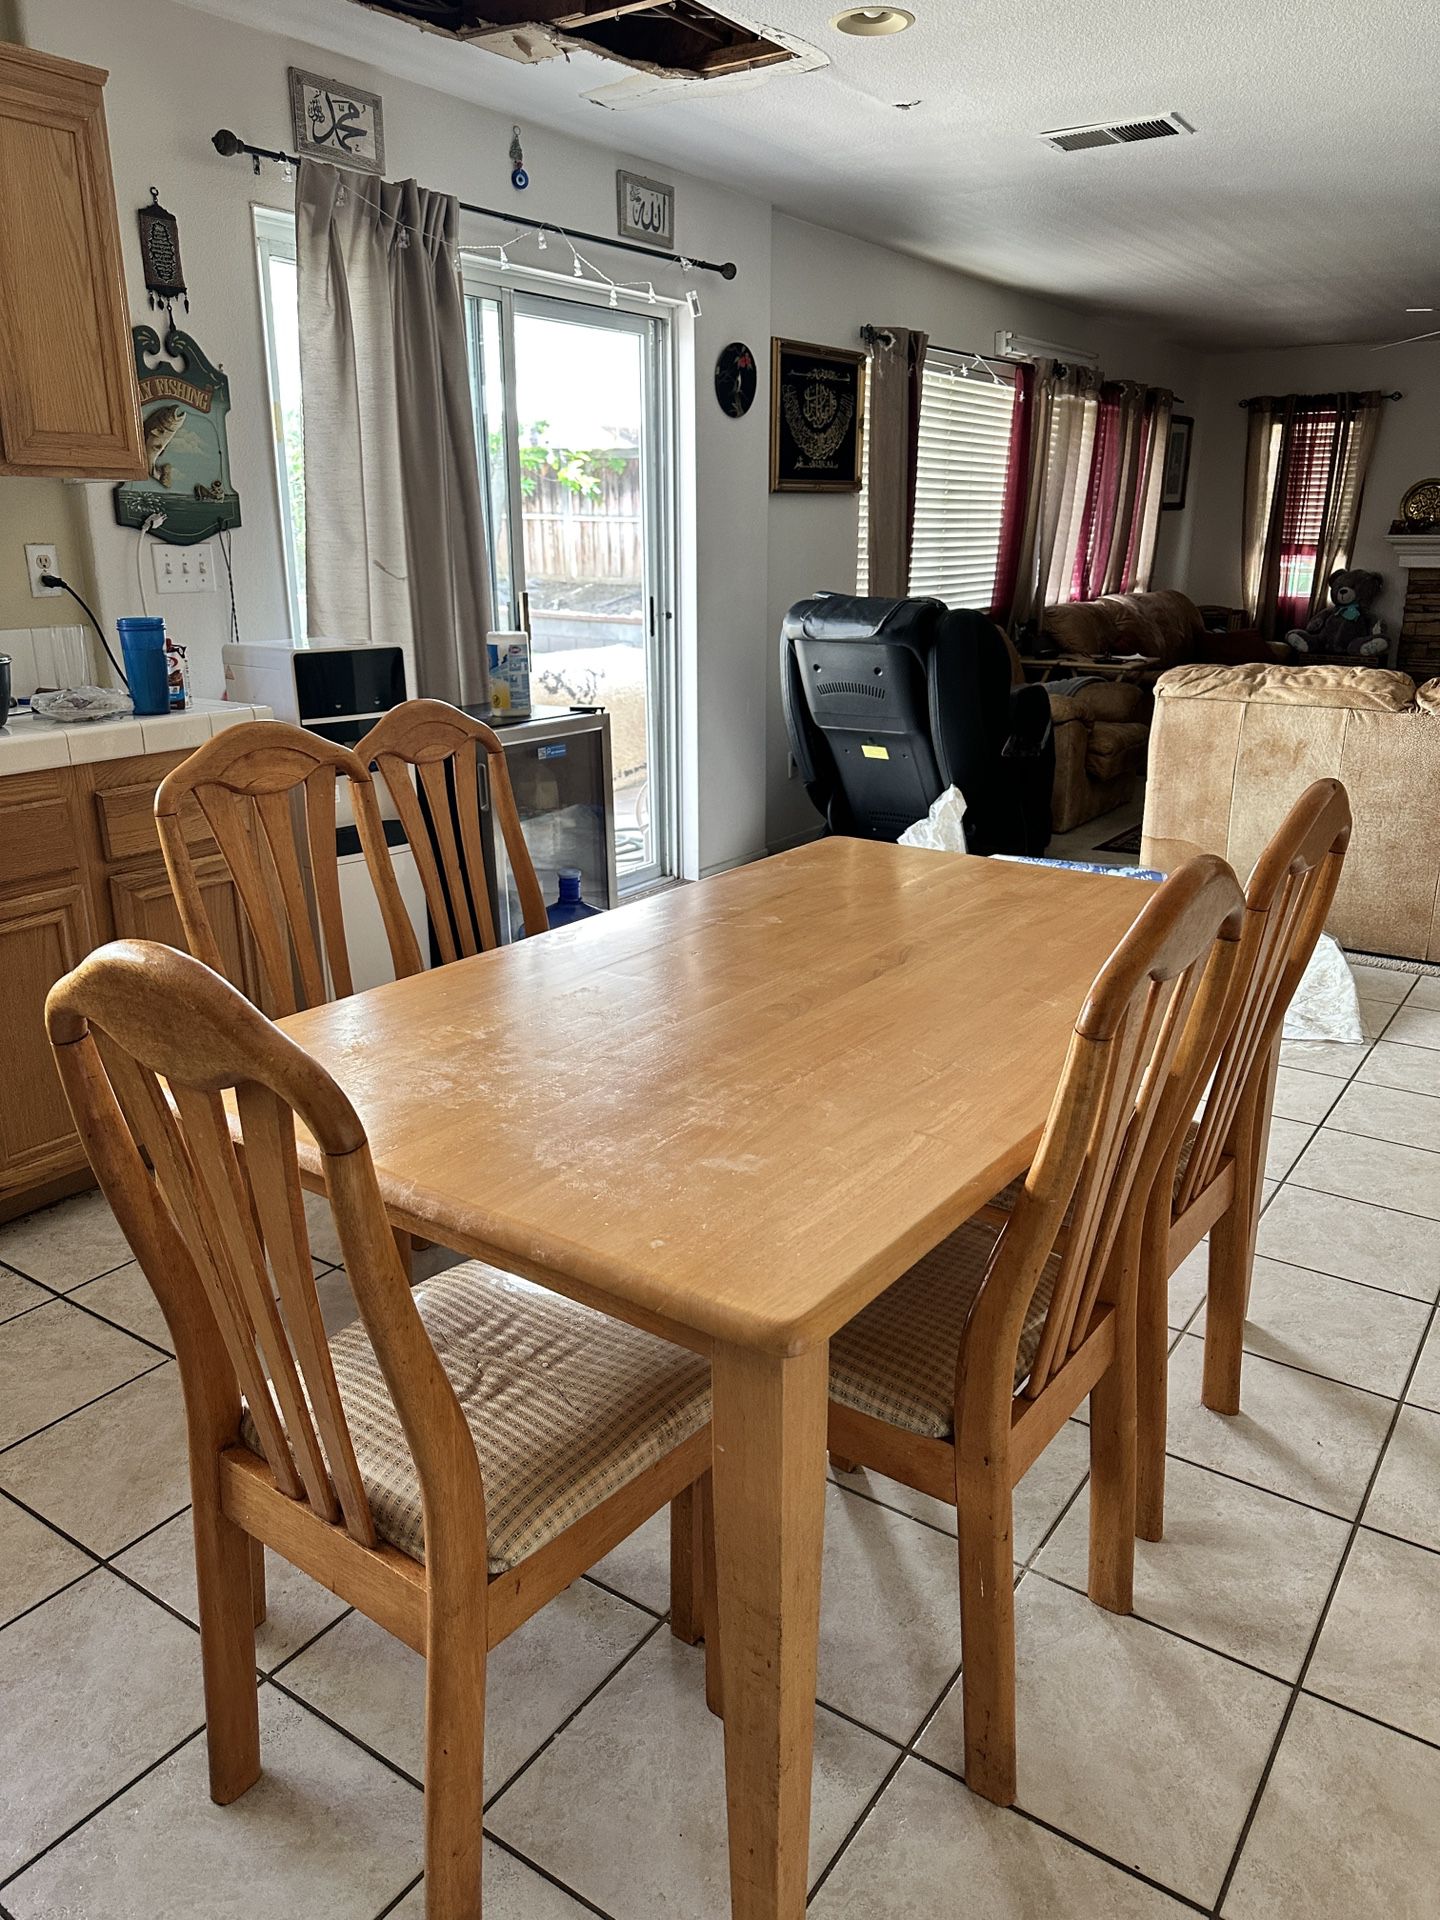 Wood kitchen table + 5 chairs